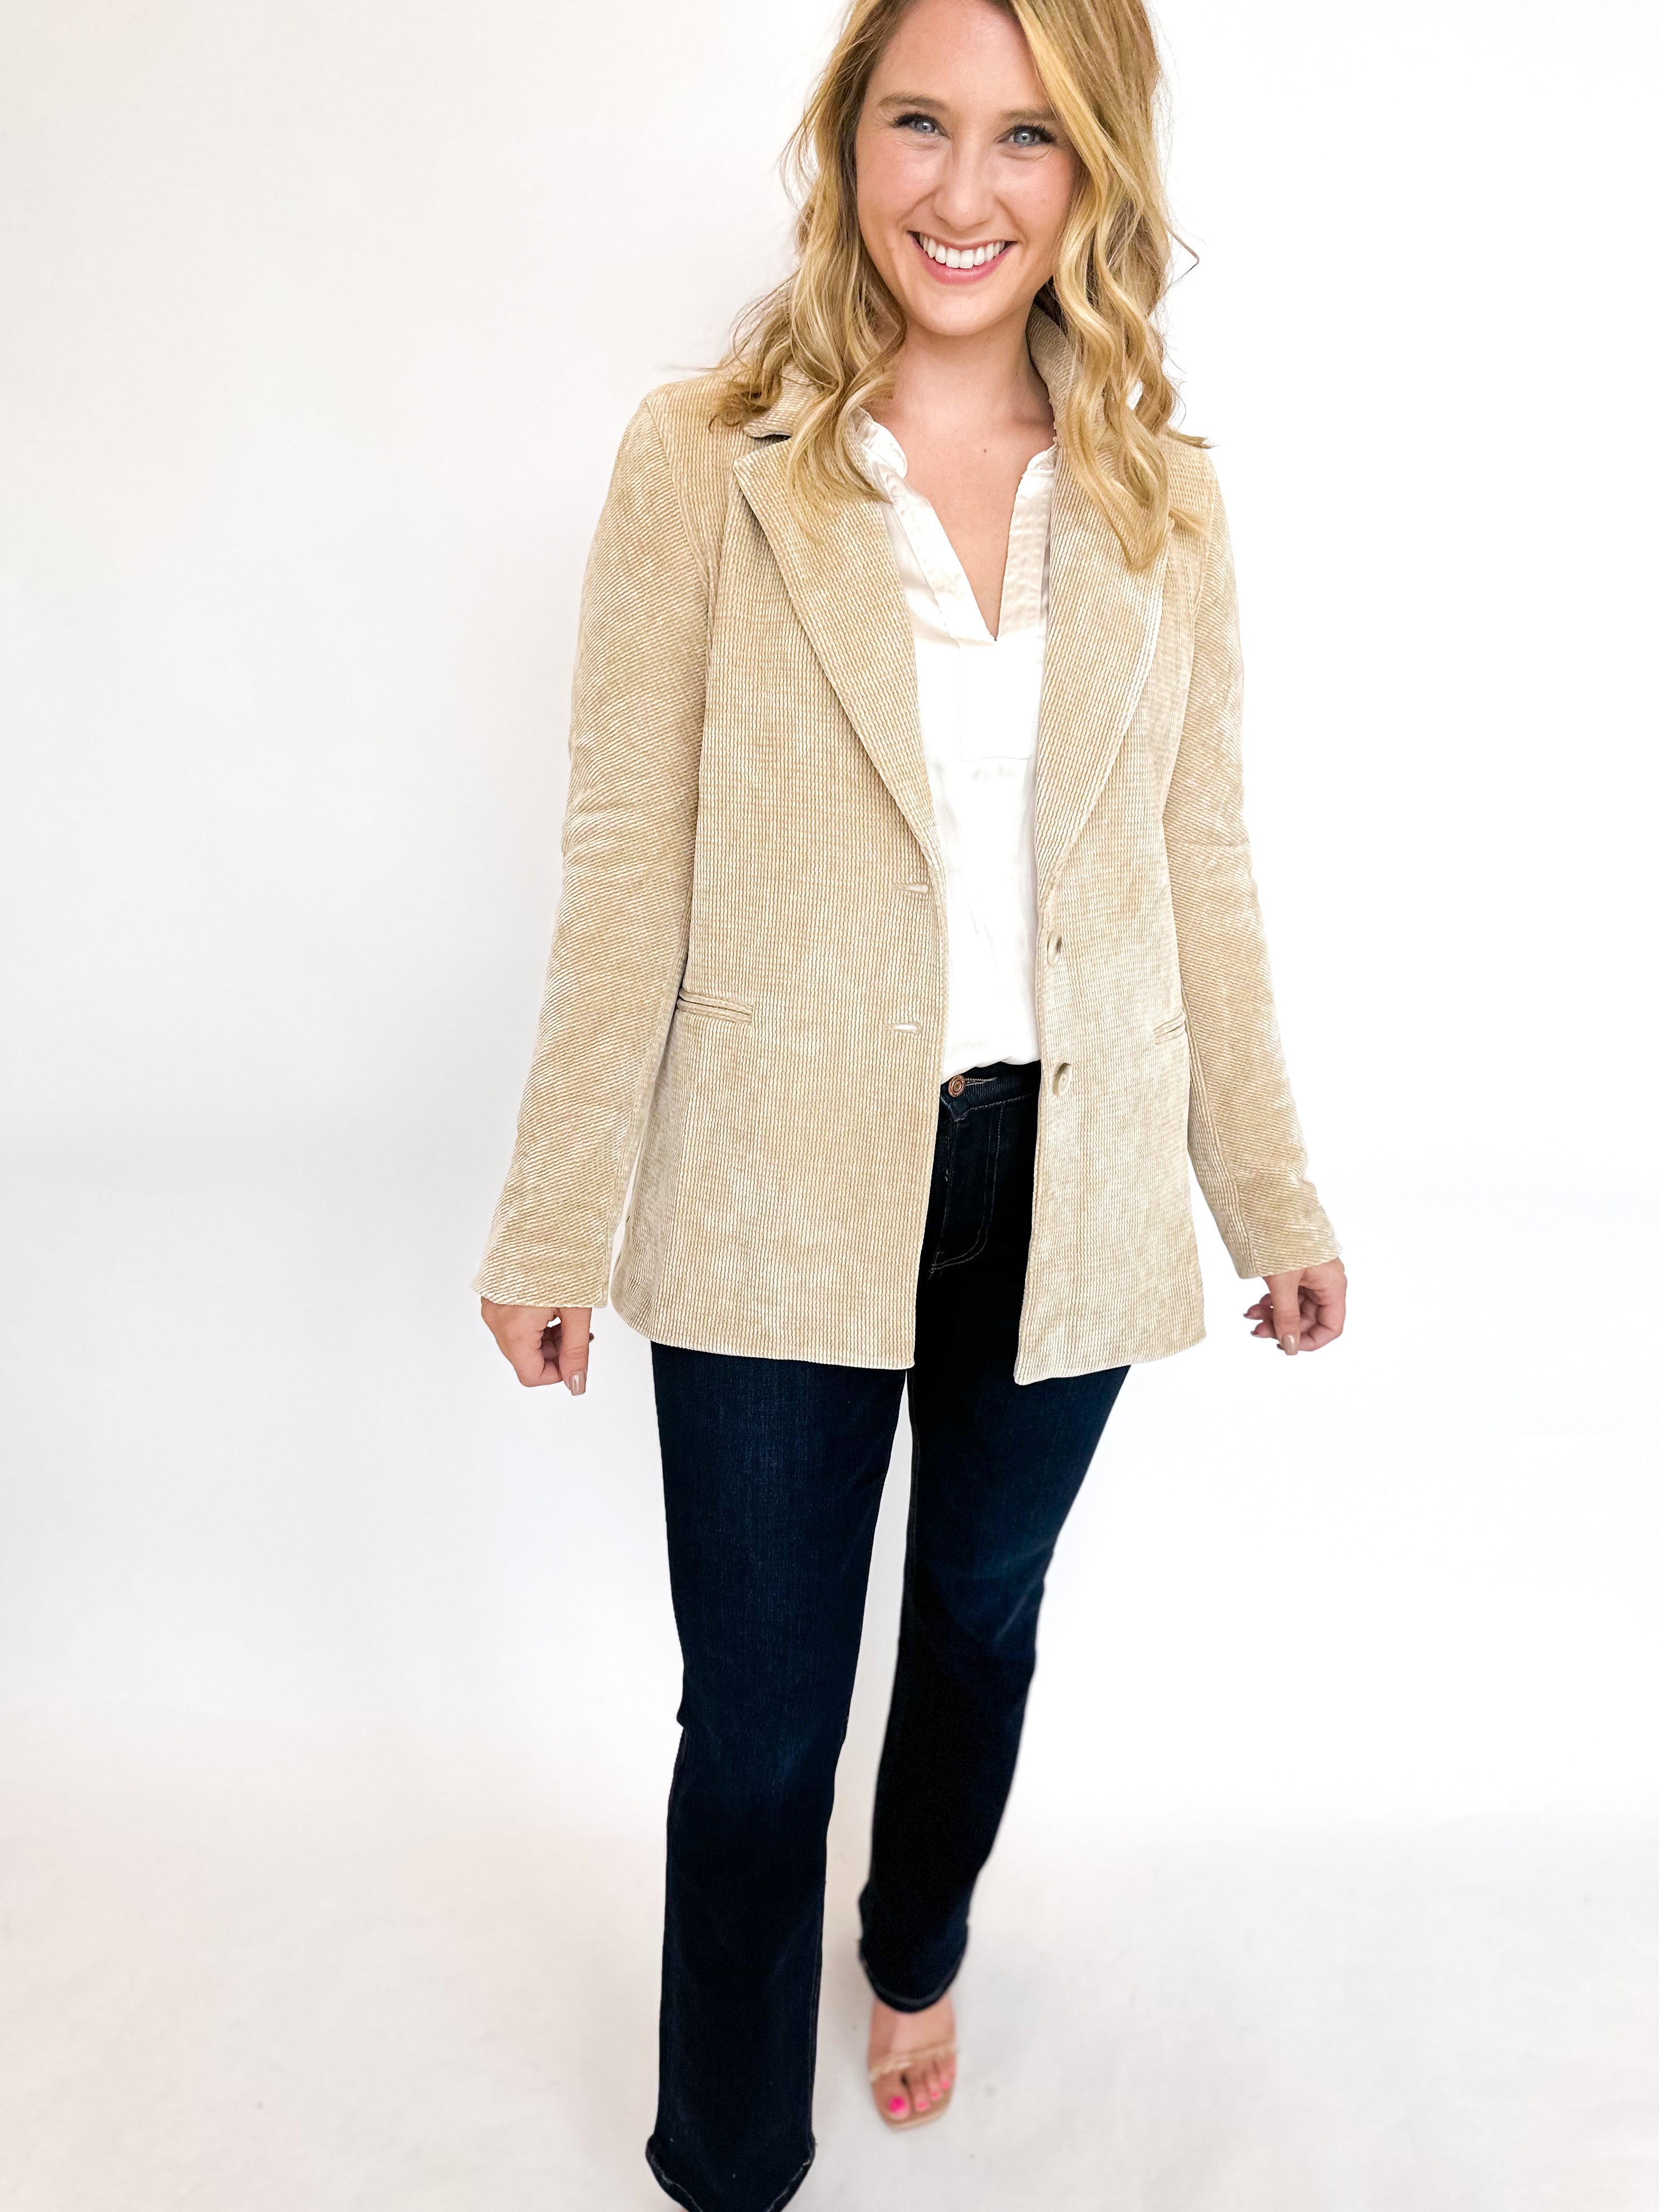 Champagne Textured Suede Blazer-600 Outerwear-CURRENT AIR CLOTHING-July & June Women's Fashion Boutique Located in San Antonio, Texas